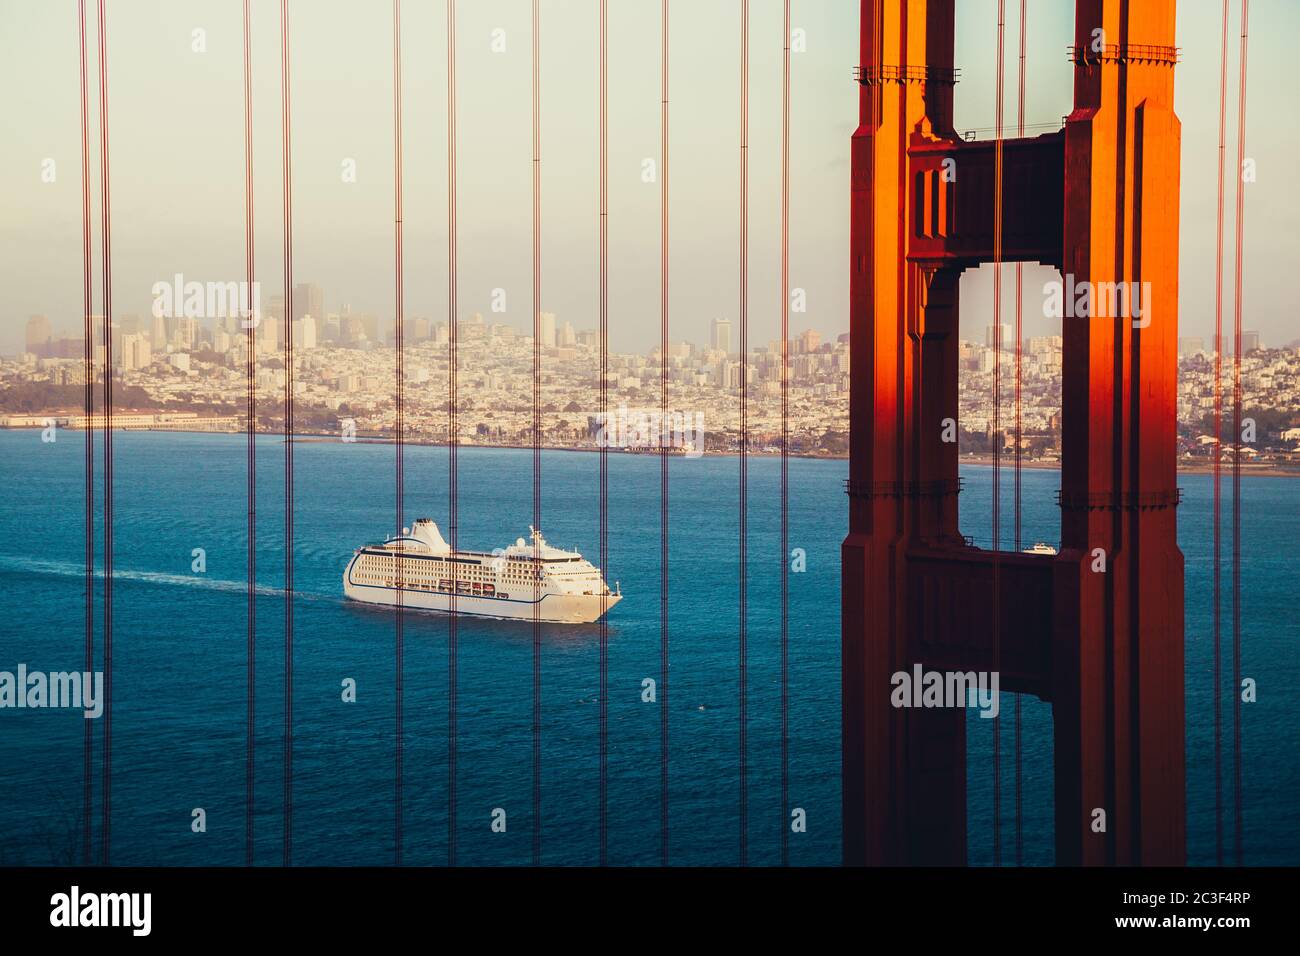 Beautiful panorama view of cruise ship approaching famous Golden Gate Bridge with the skyline of San Francisco in the background at sunset, USA Stock Photo